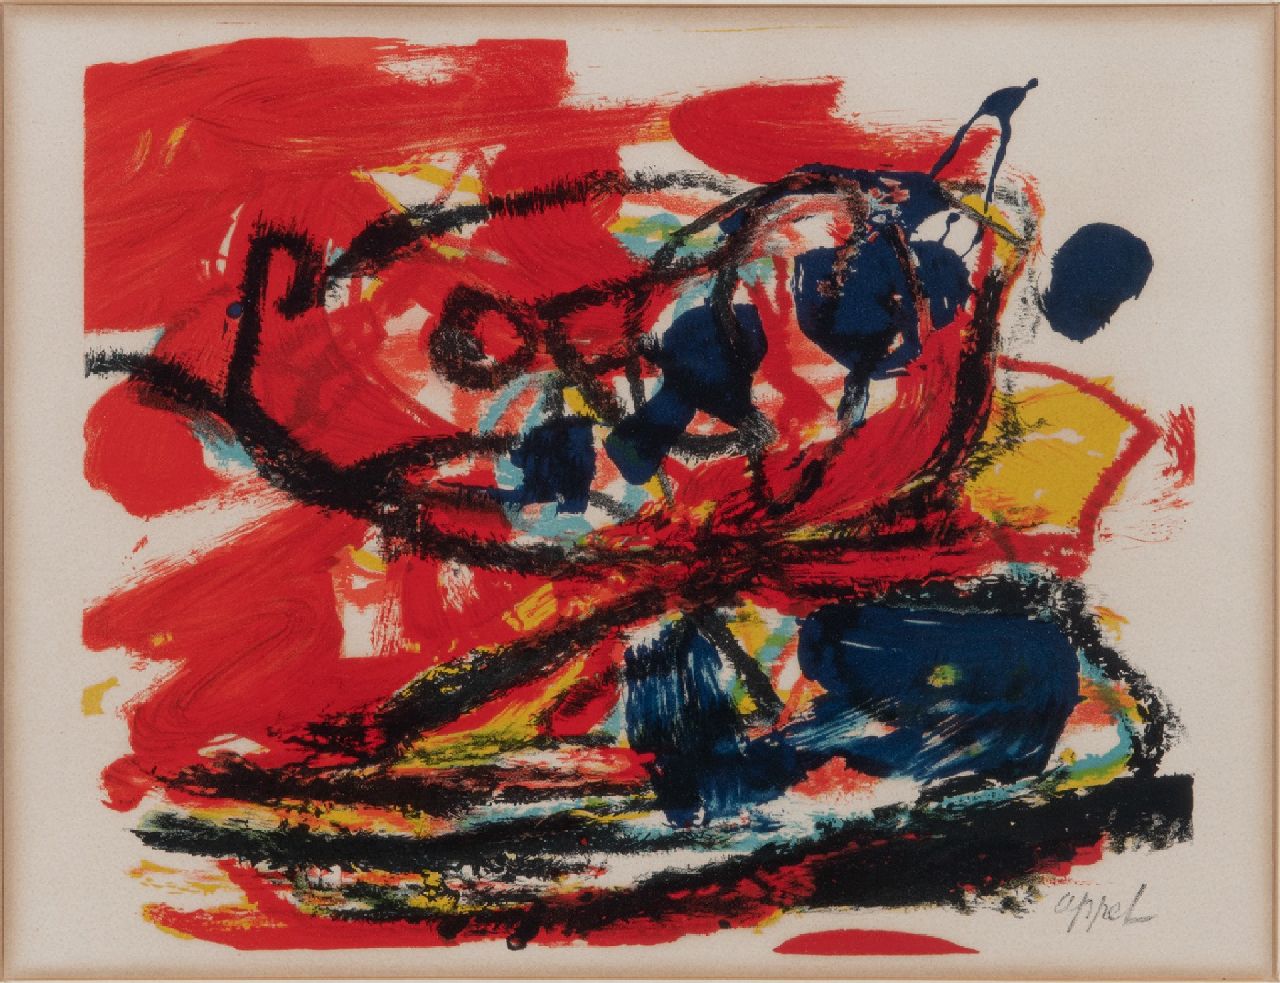 Appel C.K.  | Christiaan 'Karel' Appel | Prints and Multiples offered for sale | Musique Barbare, lithograph 28.0 x 37.5 cm, signed l.r.